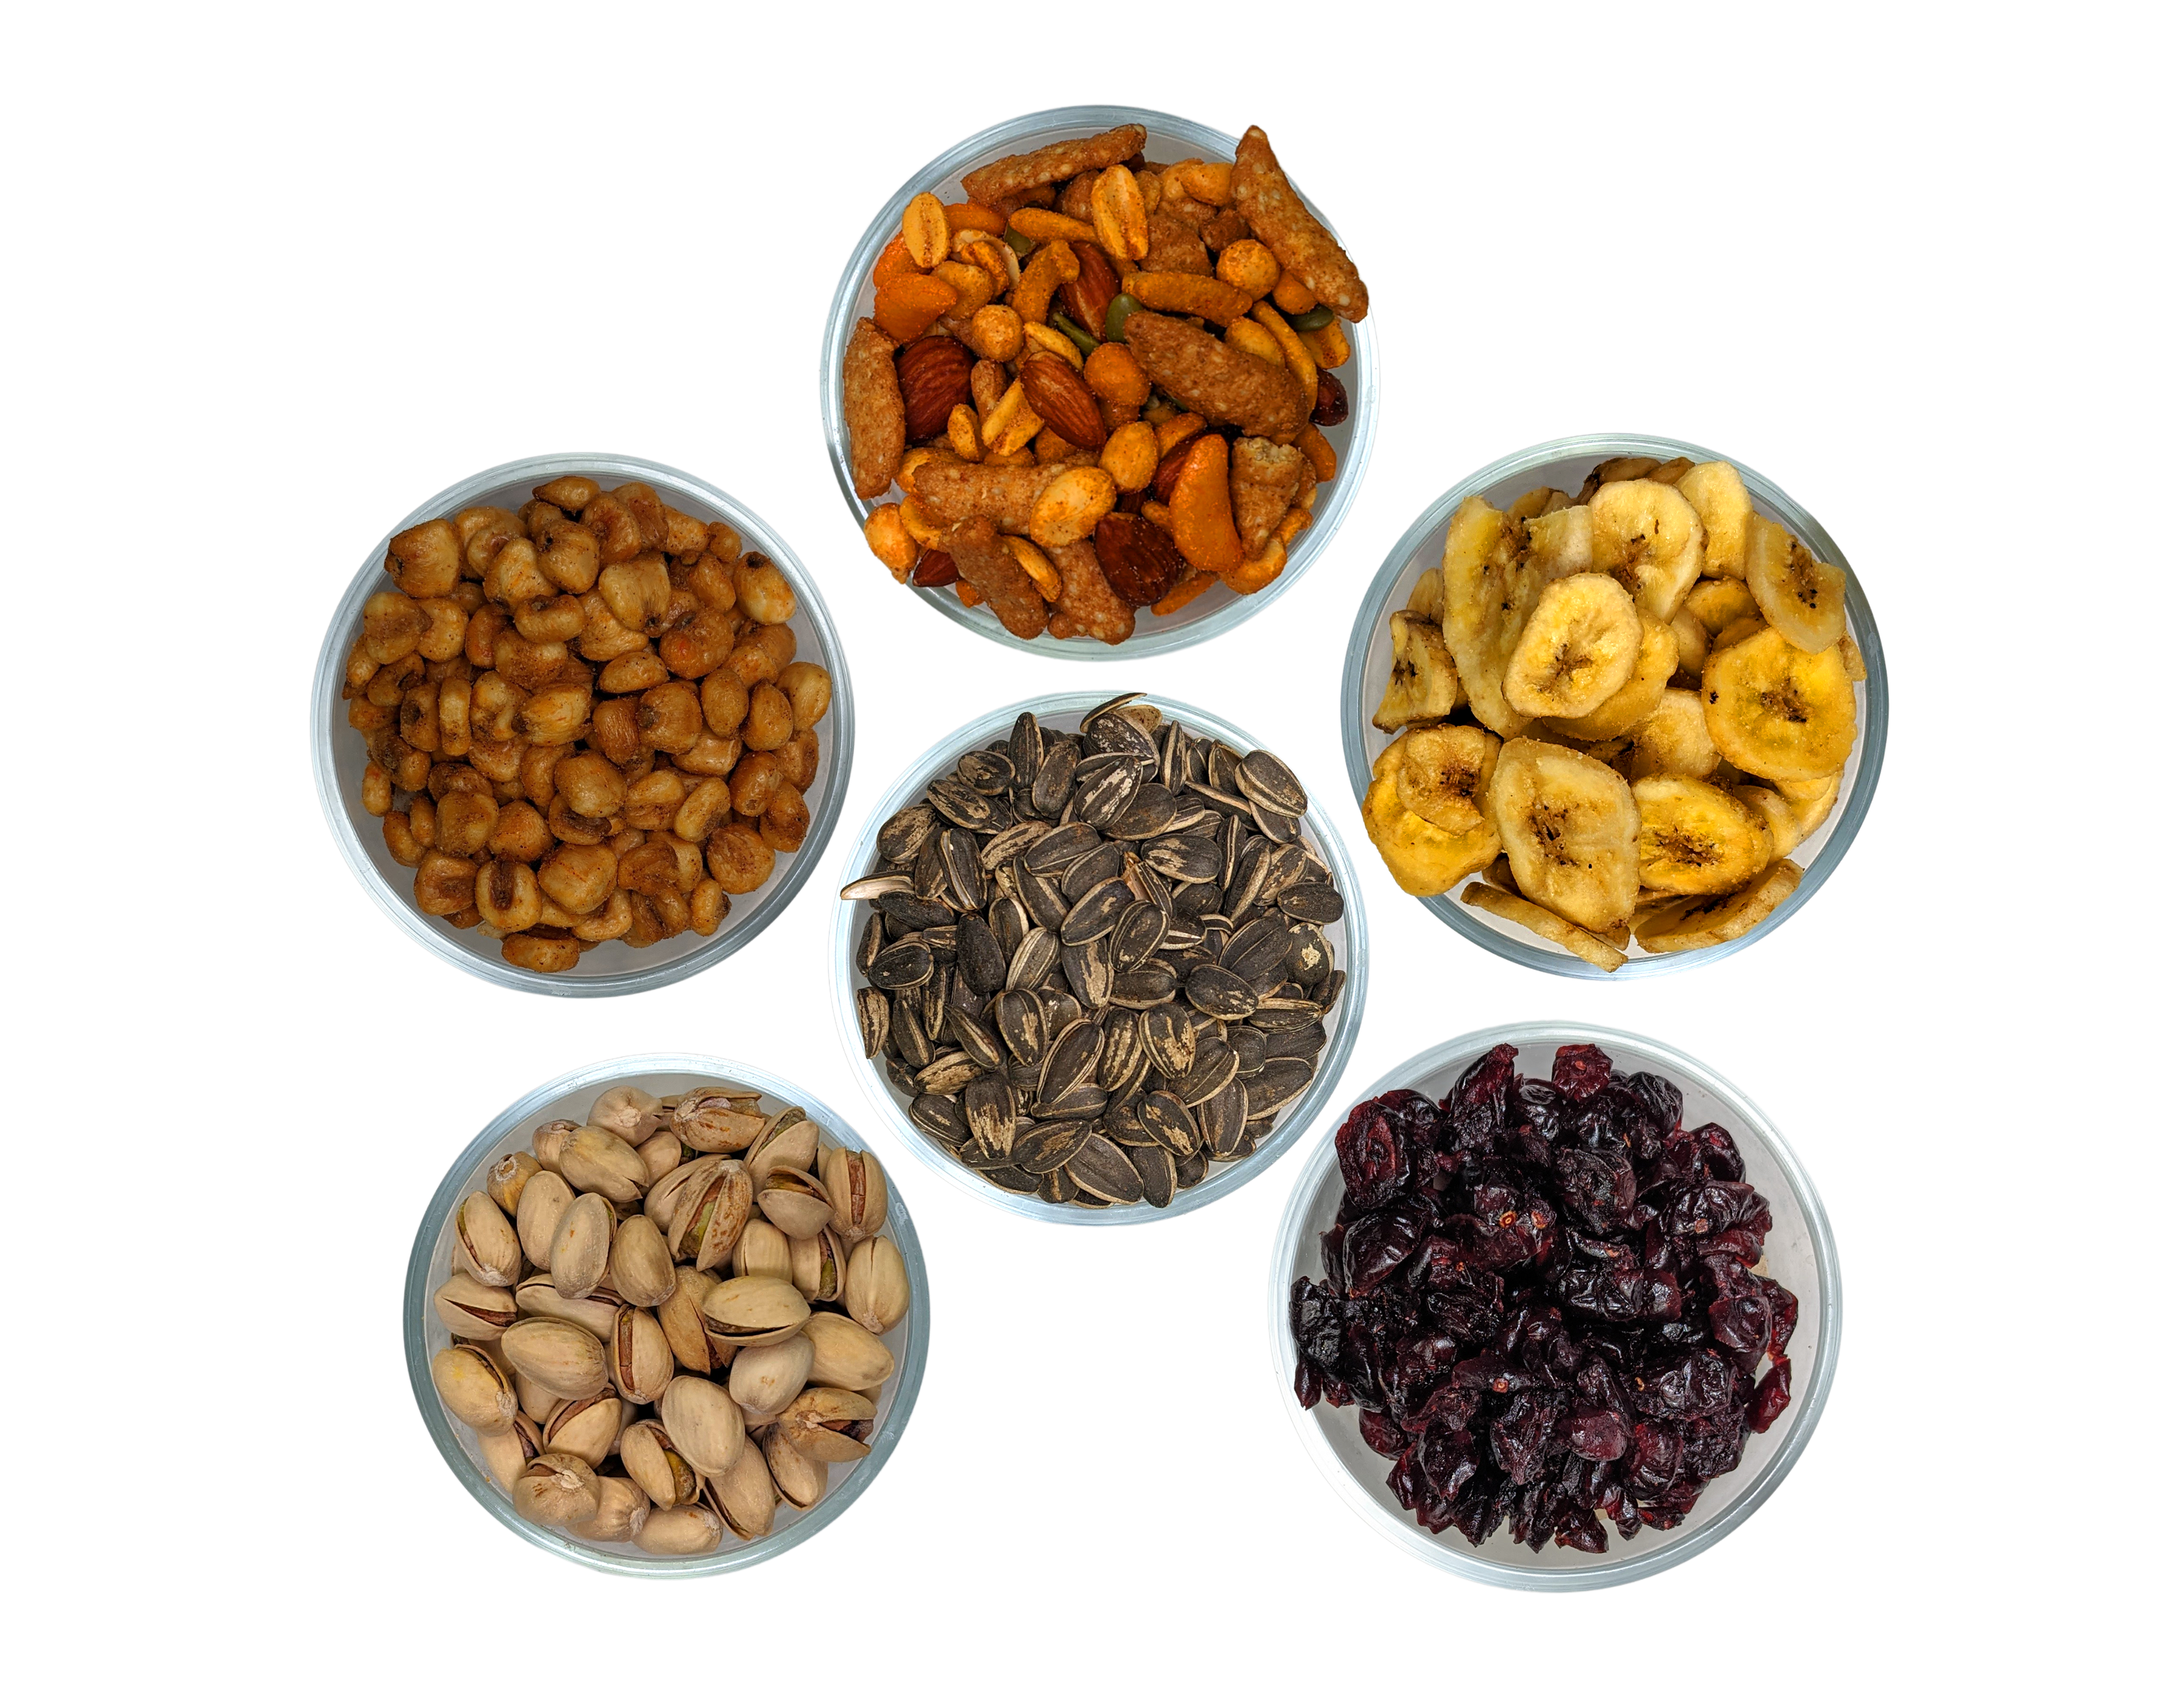 Candy gifts | healthy gifts | healthy gift box | natural gift box | healthy corporate gifts | Trail Mix | Sunflower Seeds | Banana Chips | Pistachios | Corn Nuts | Dried Cranberries.